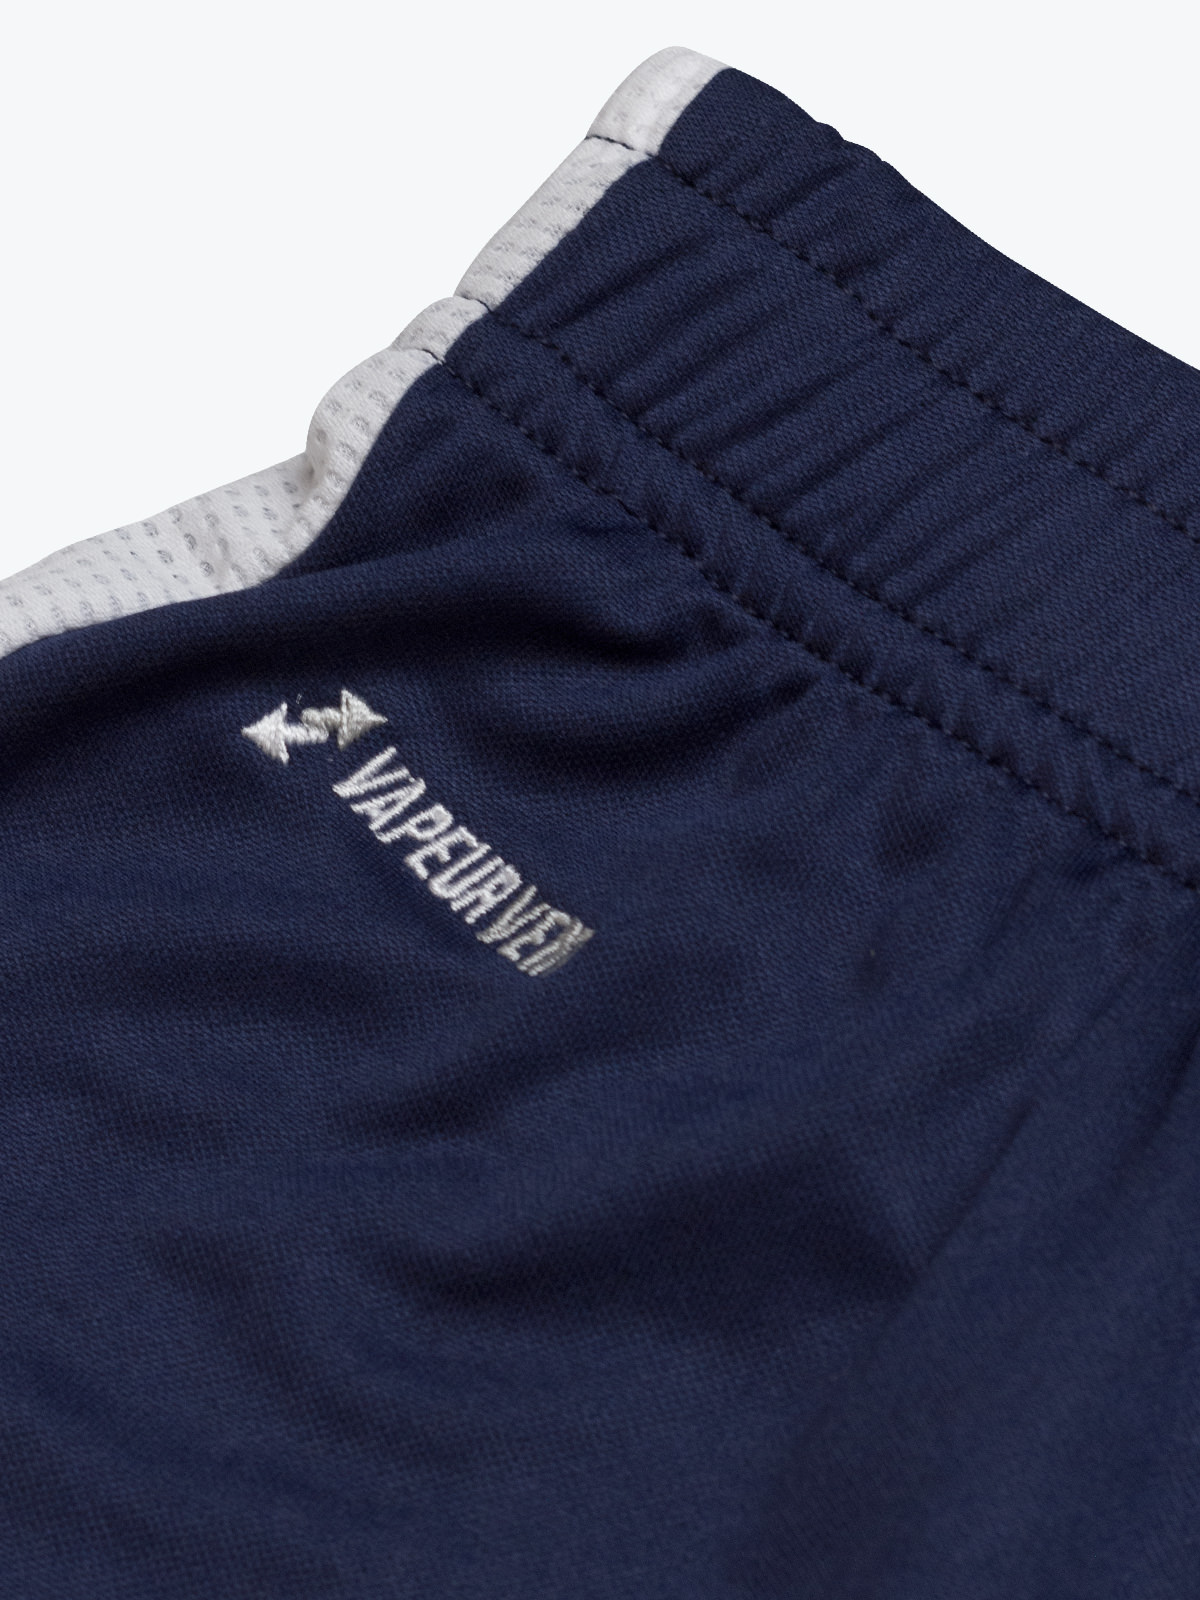 picture of fusion short - navy